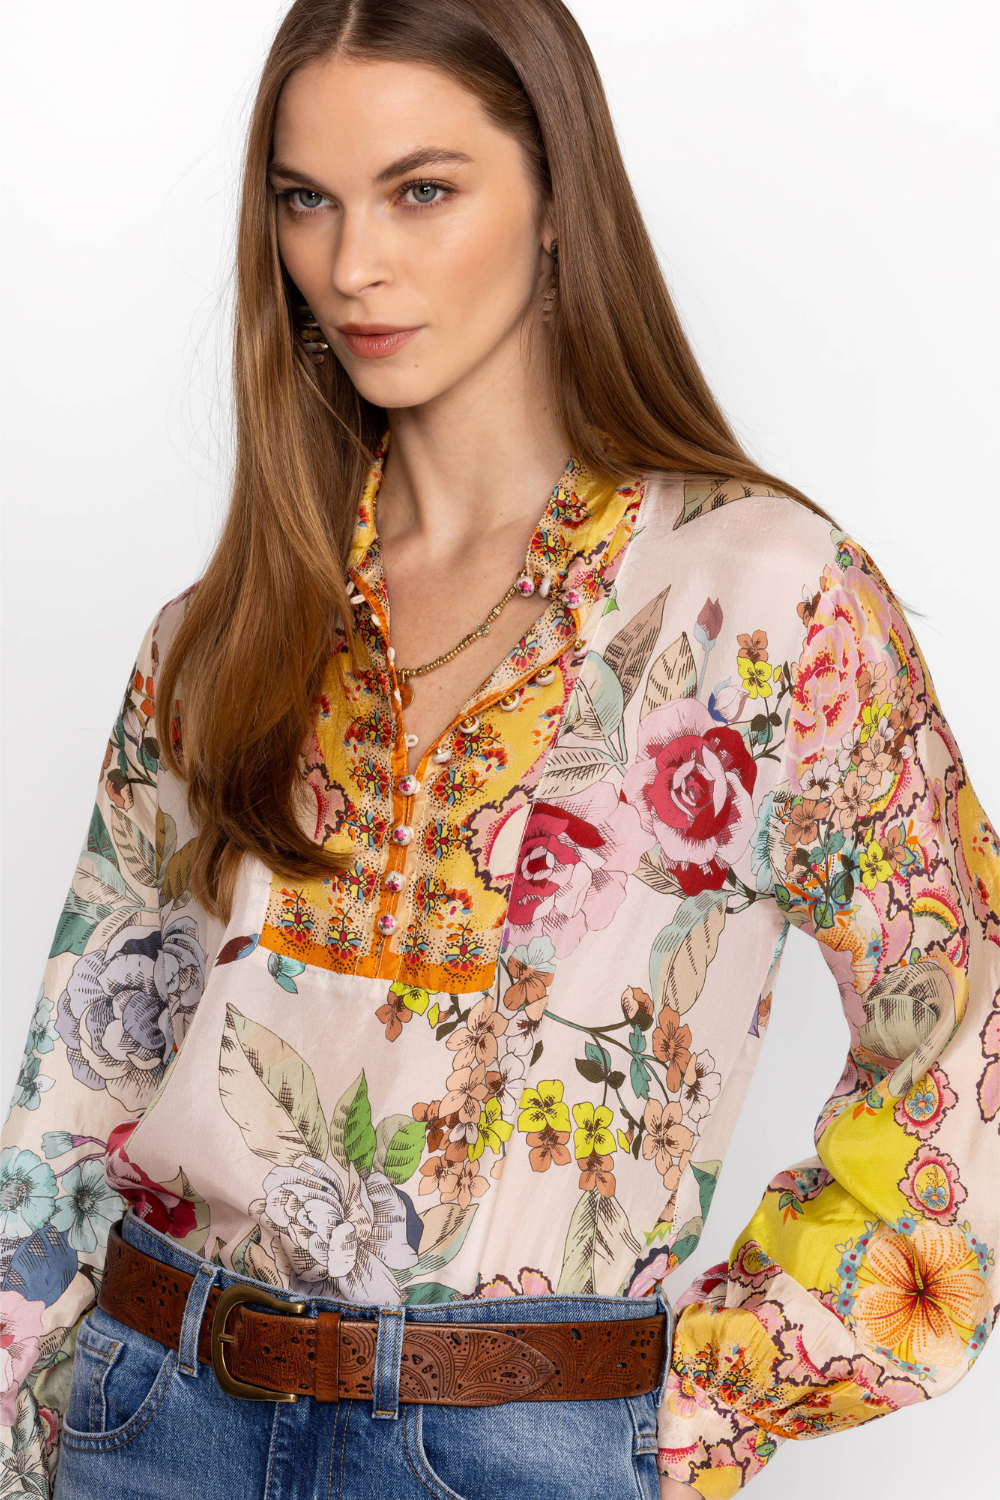 Johnny Was Rossy Abby Blouse - Multi